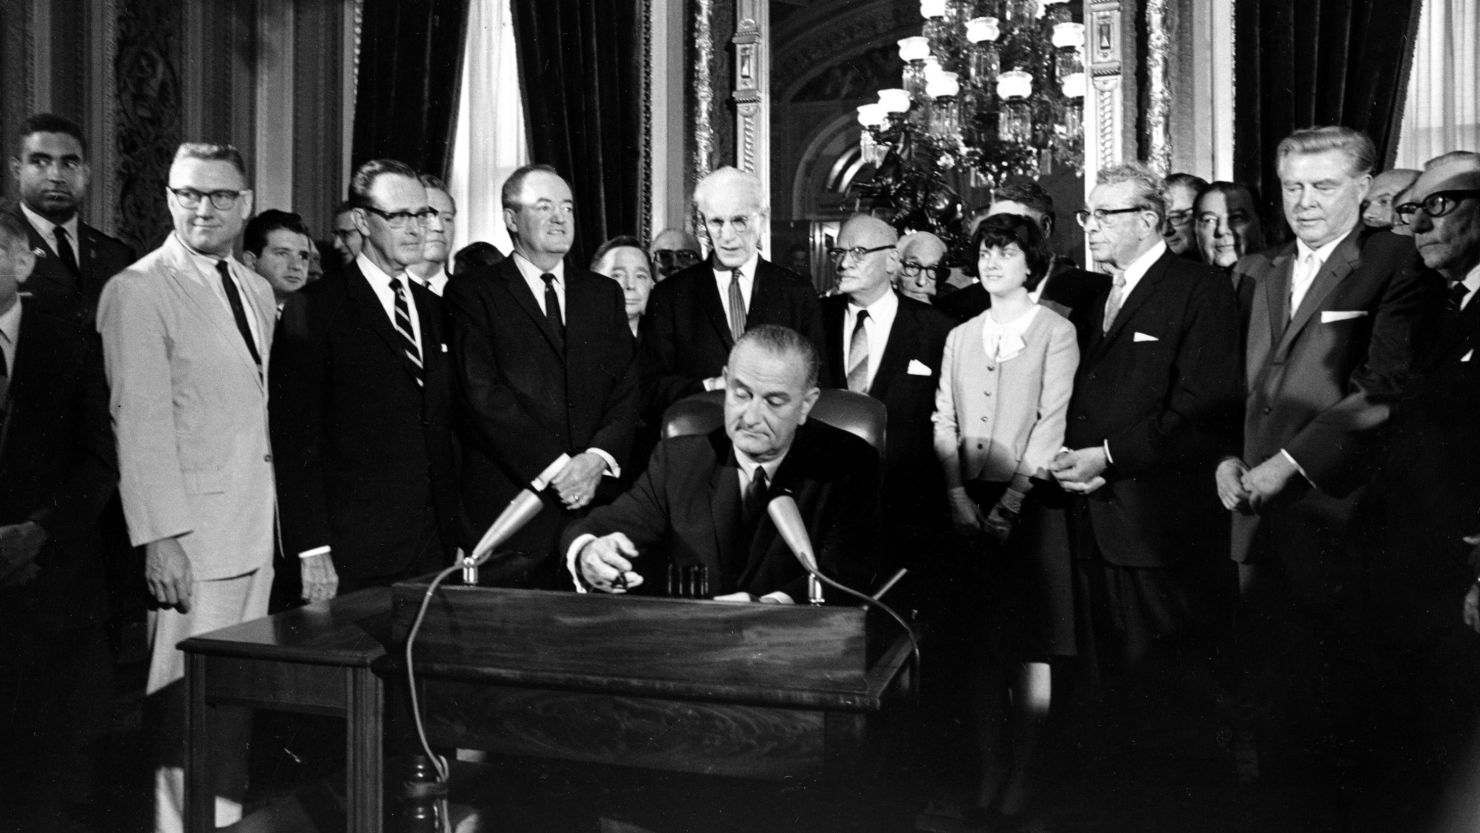 Voting Rights Act 1965 signing